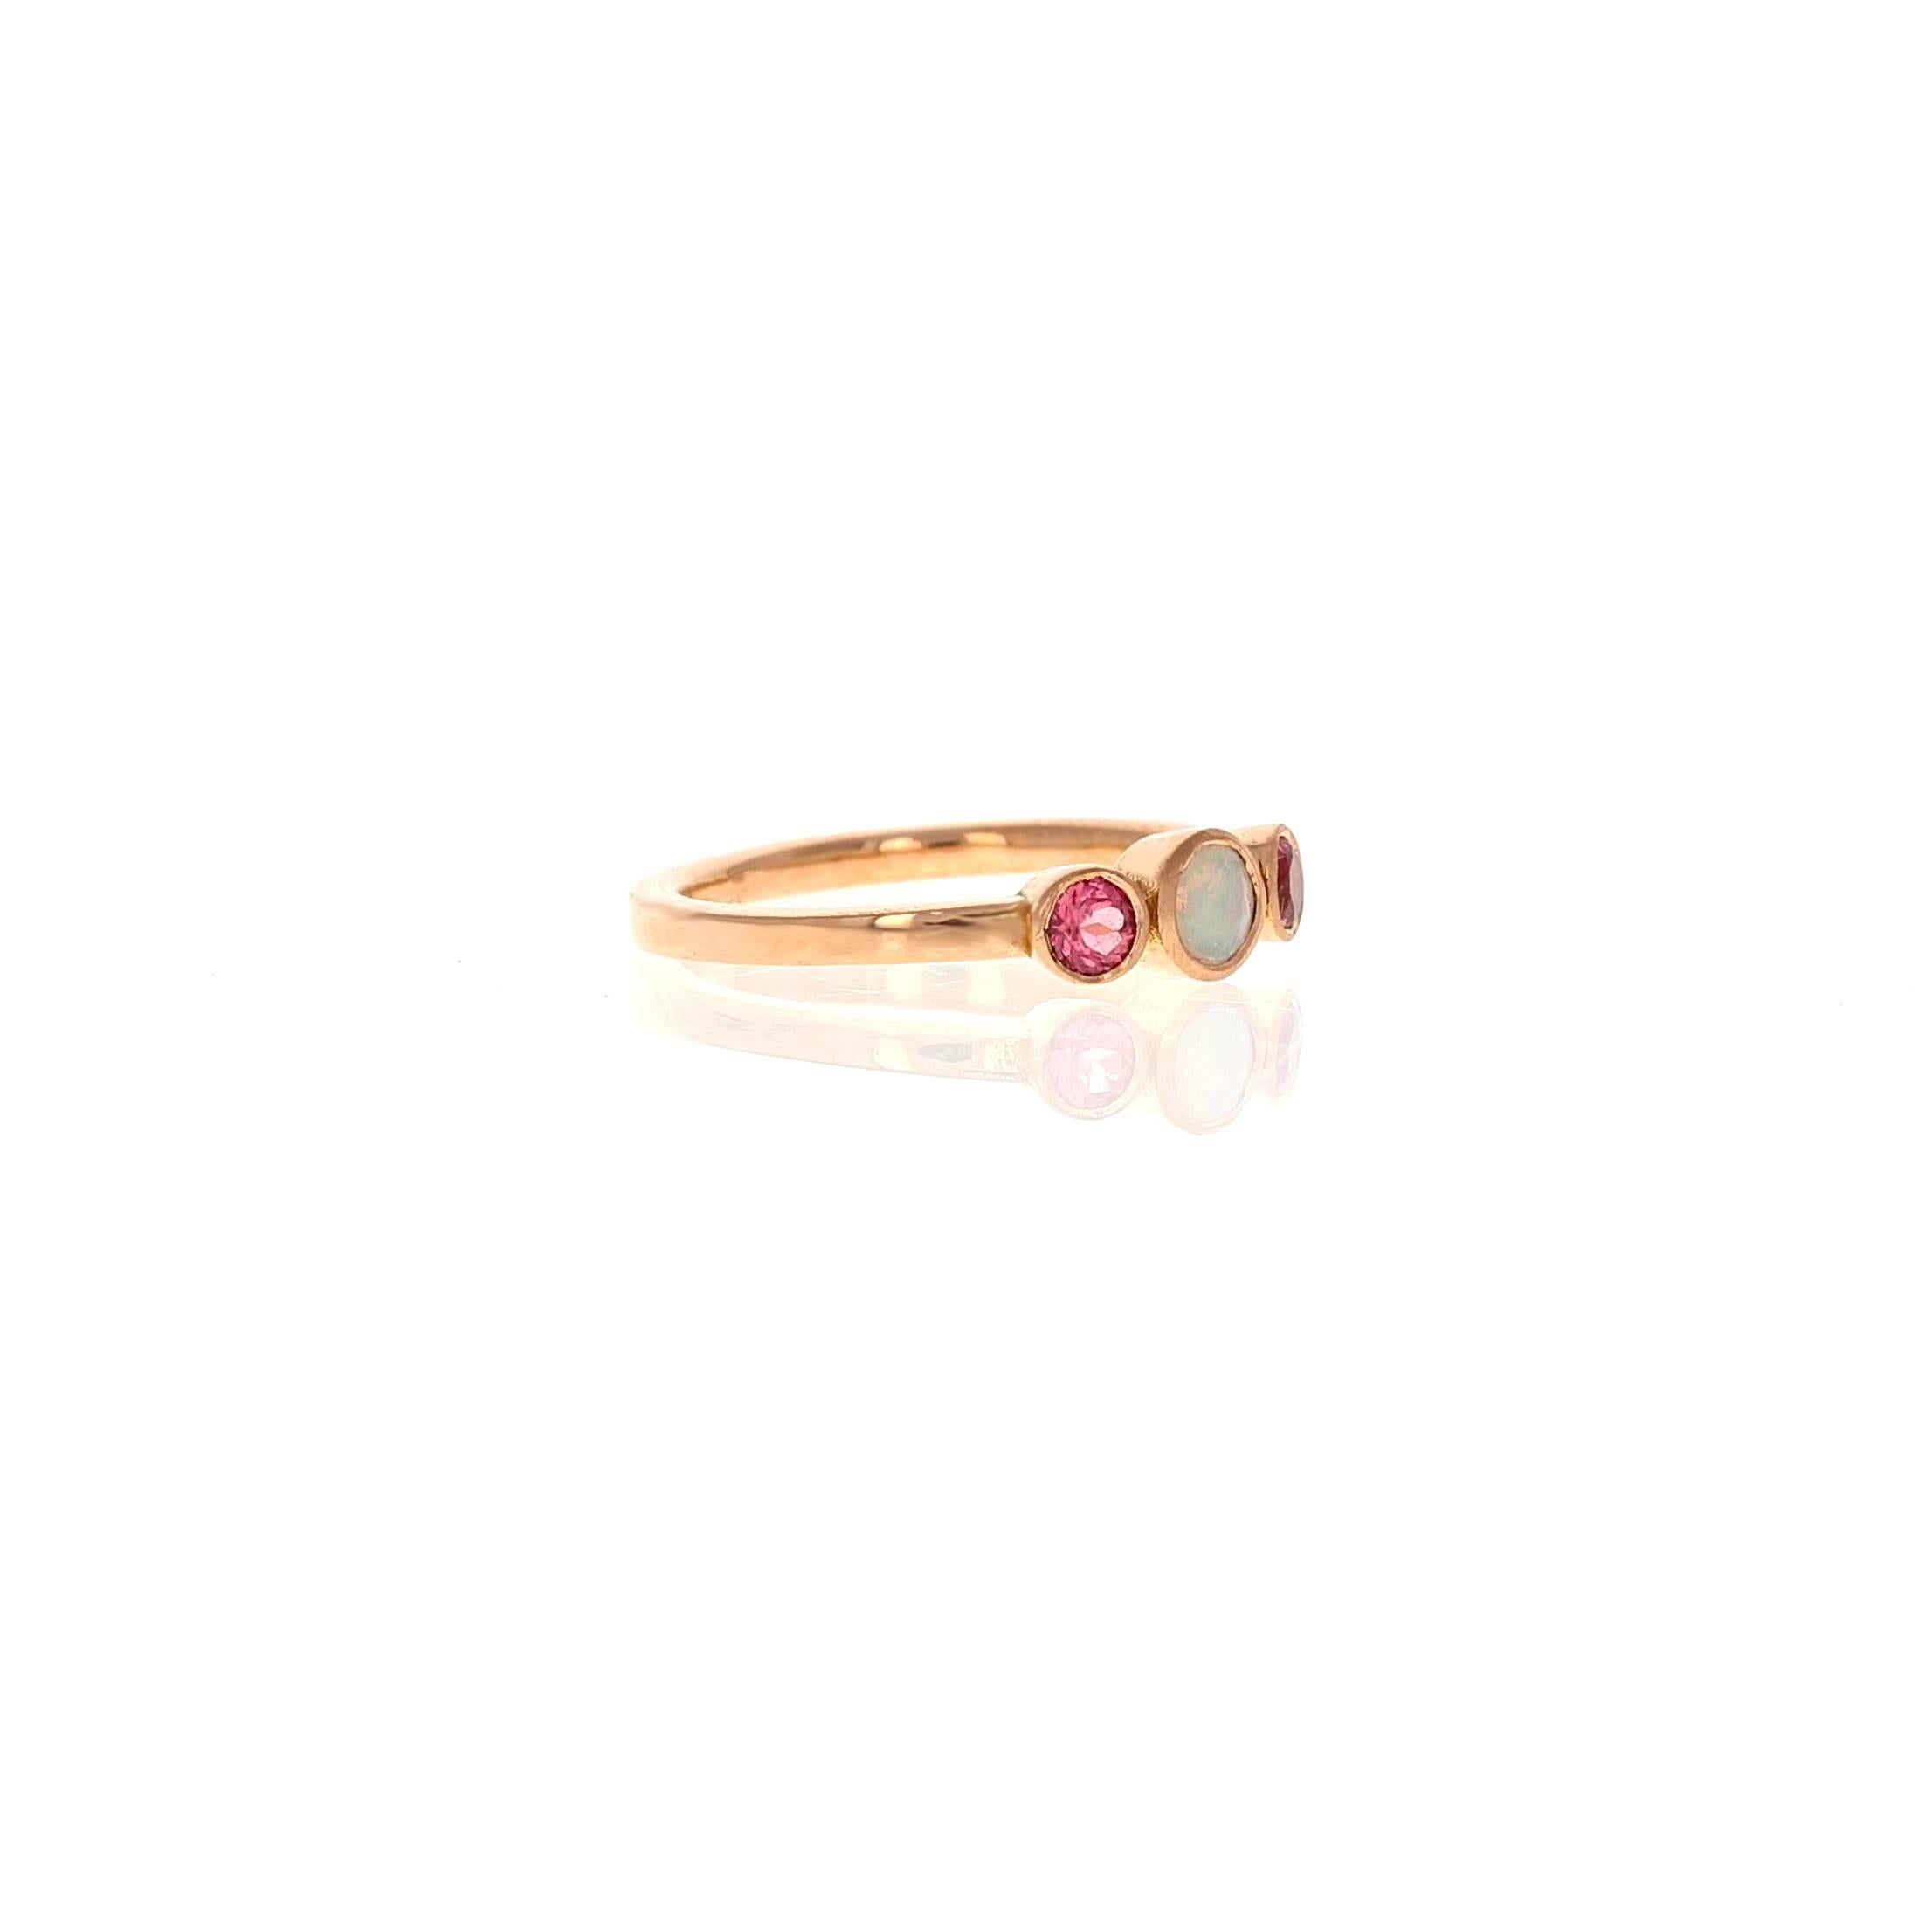 The Alice ring in 18kt Rose Gold with an Ethiopian Opal  & pink Spinel is a three stone ring; the number 3 stands in symbolism of the planet Jupiter which governs good fortune, wealth and success.

• 18kt rose gold
• Ethiopian opal & Vietnam